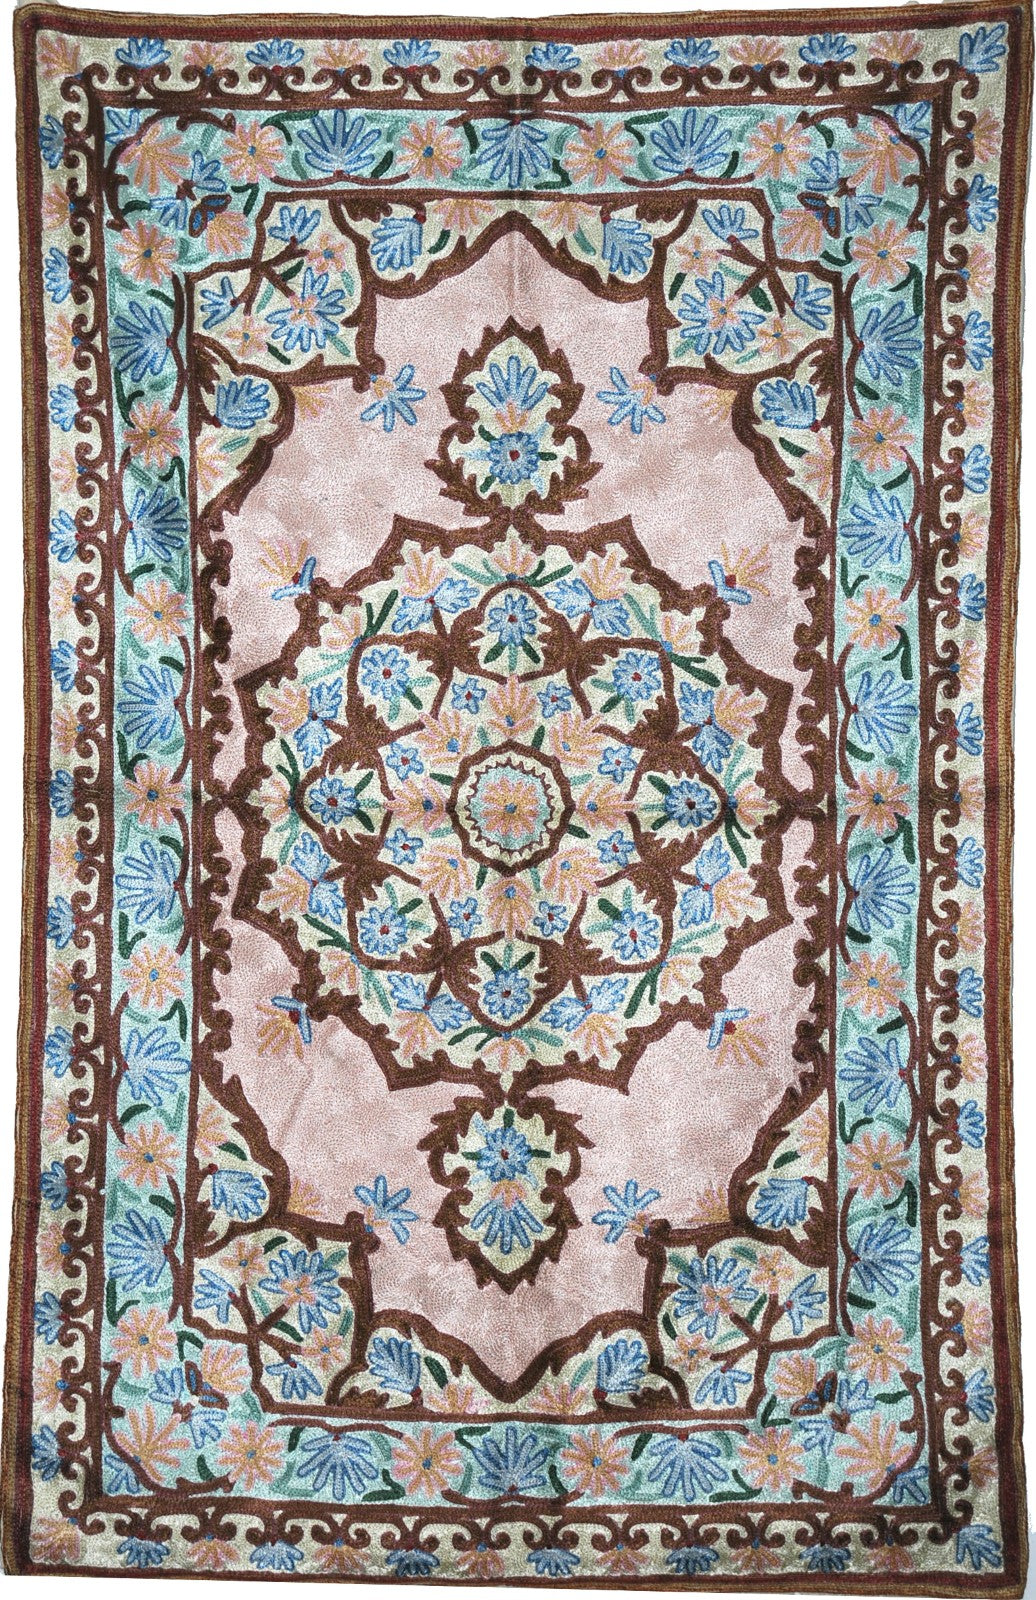 ChainStitch Tapestry Silk Wall Hanging Area Rug, Pink and Blue Embroidery 2.5x4 feet #CWR10107